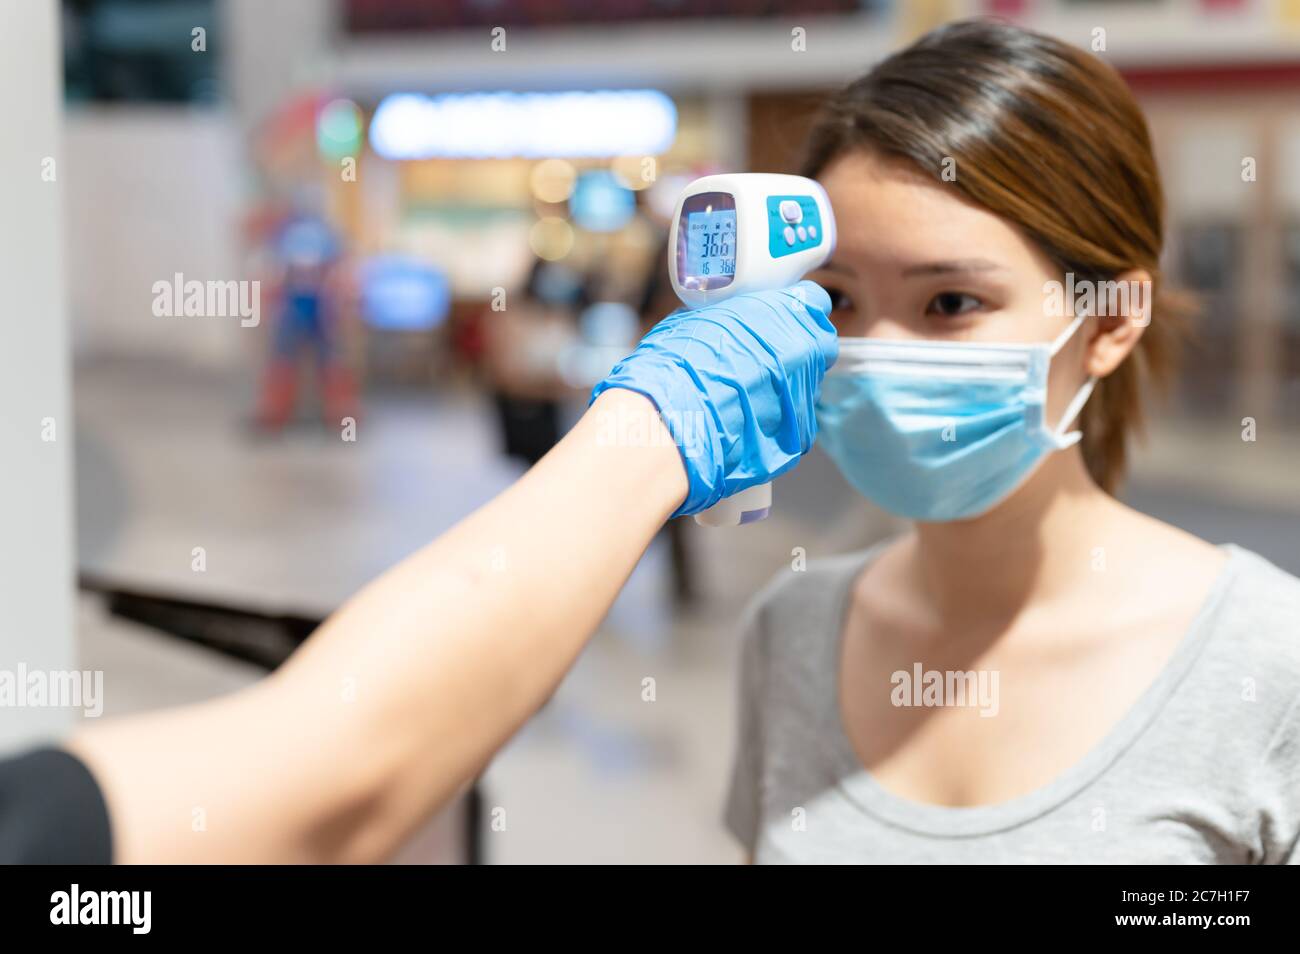 Body temperature measurement, Young Asian woman is checked by infrared digital thermometer before entrance building or restaurant in coronavirus outbr Stock Photo